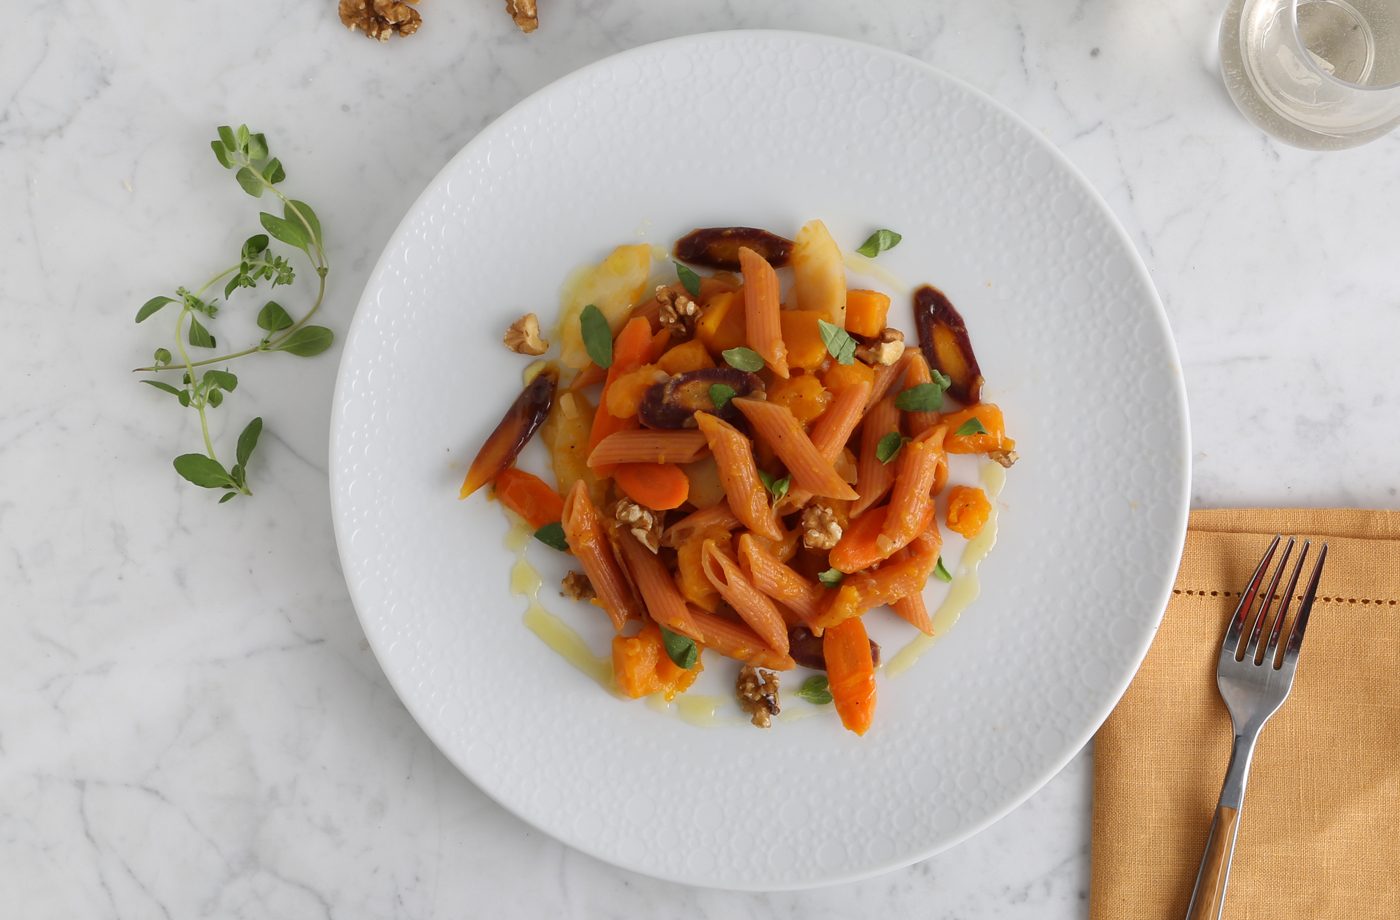 Try a red lentil pasta recipe for quick dinners